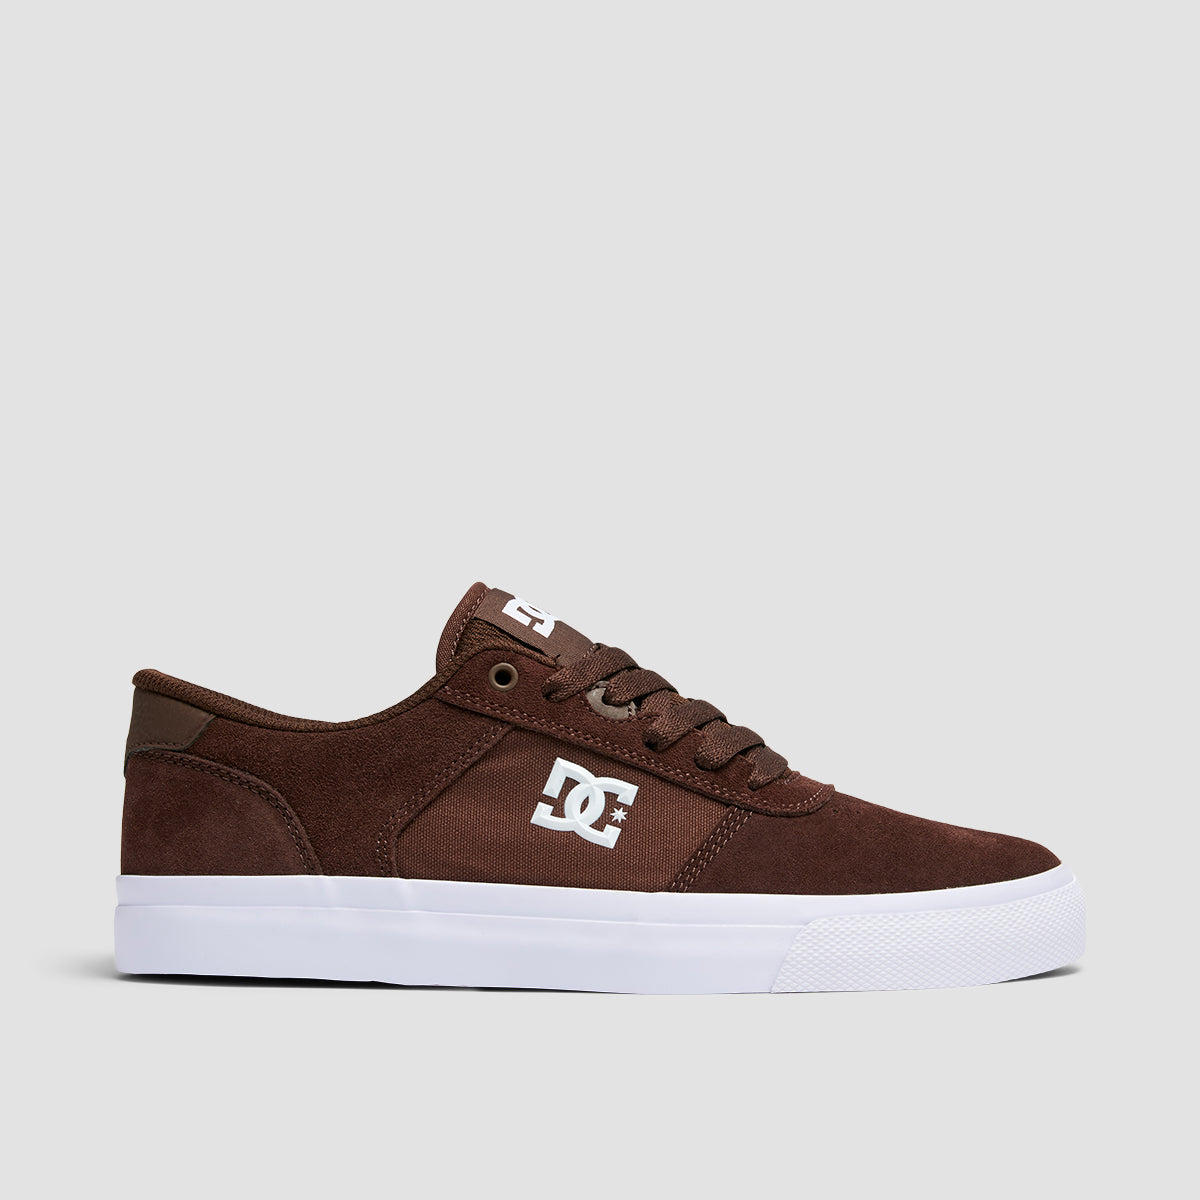 DC Teknic Shoes - Chocolate Brown